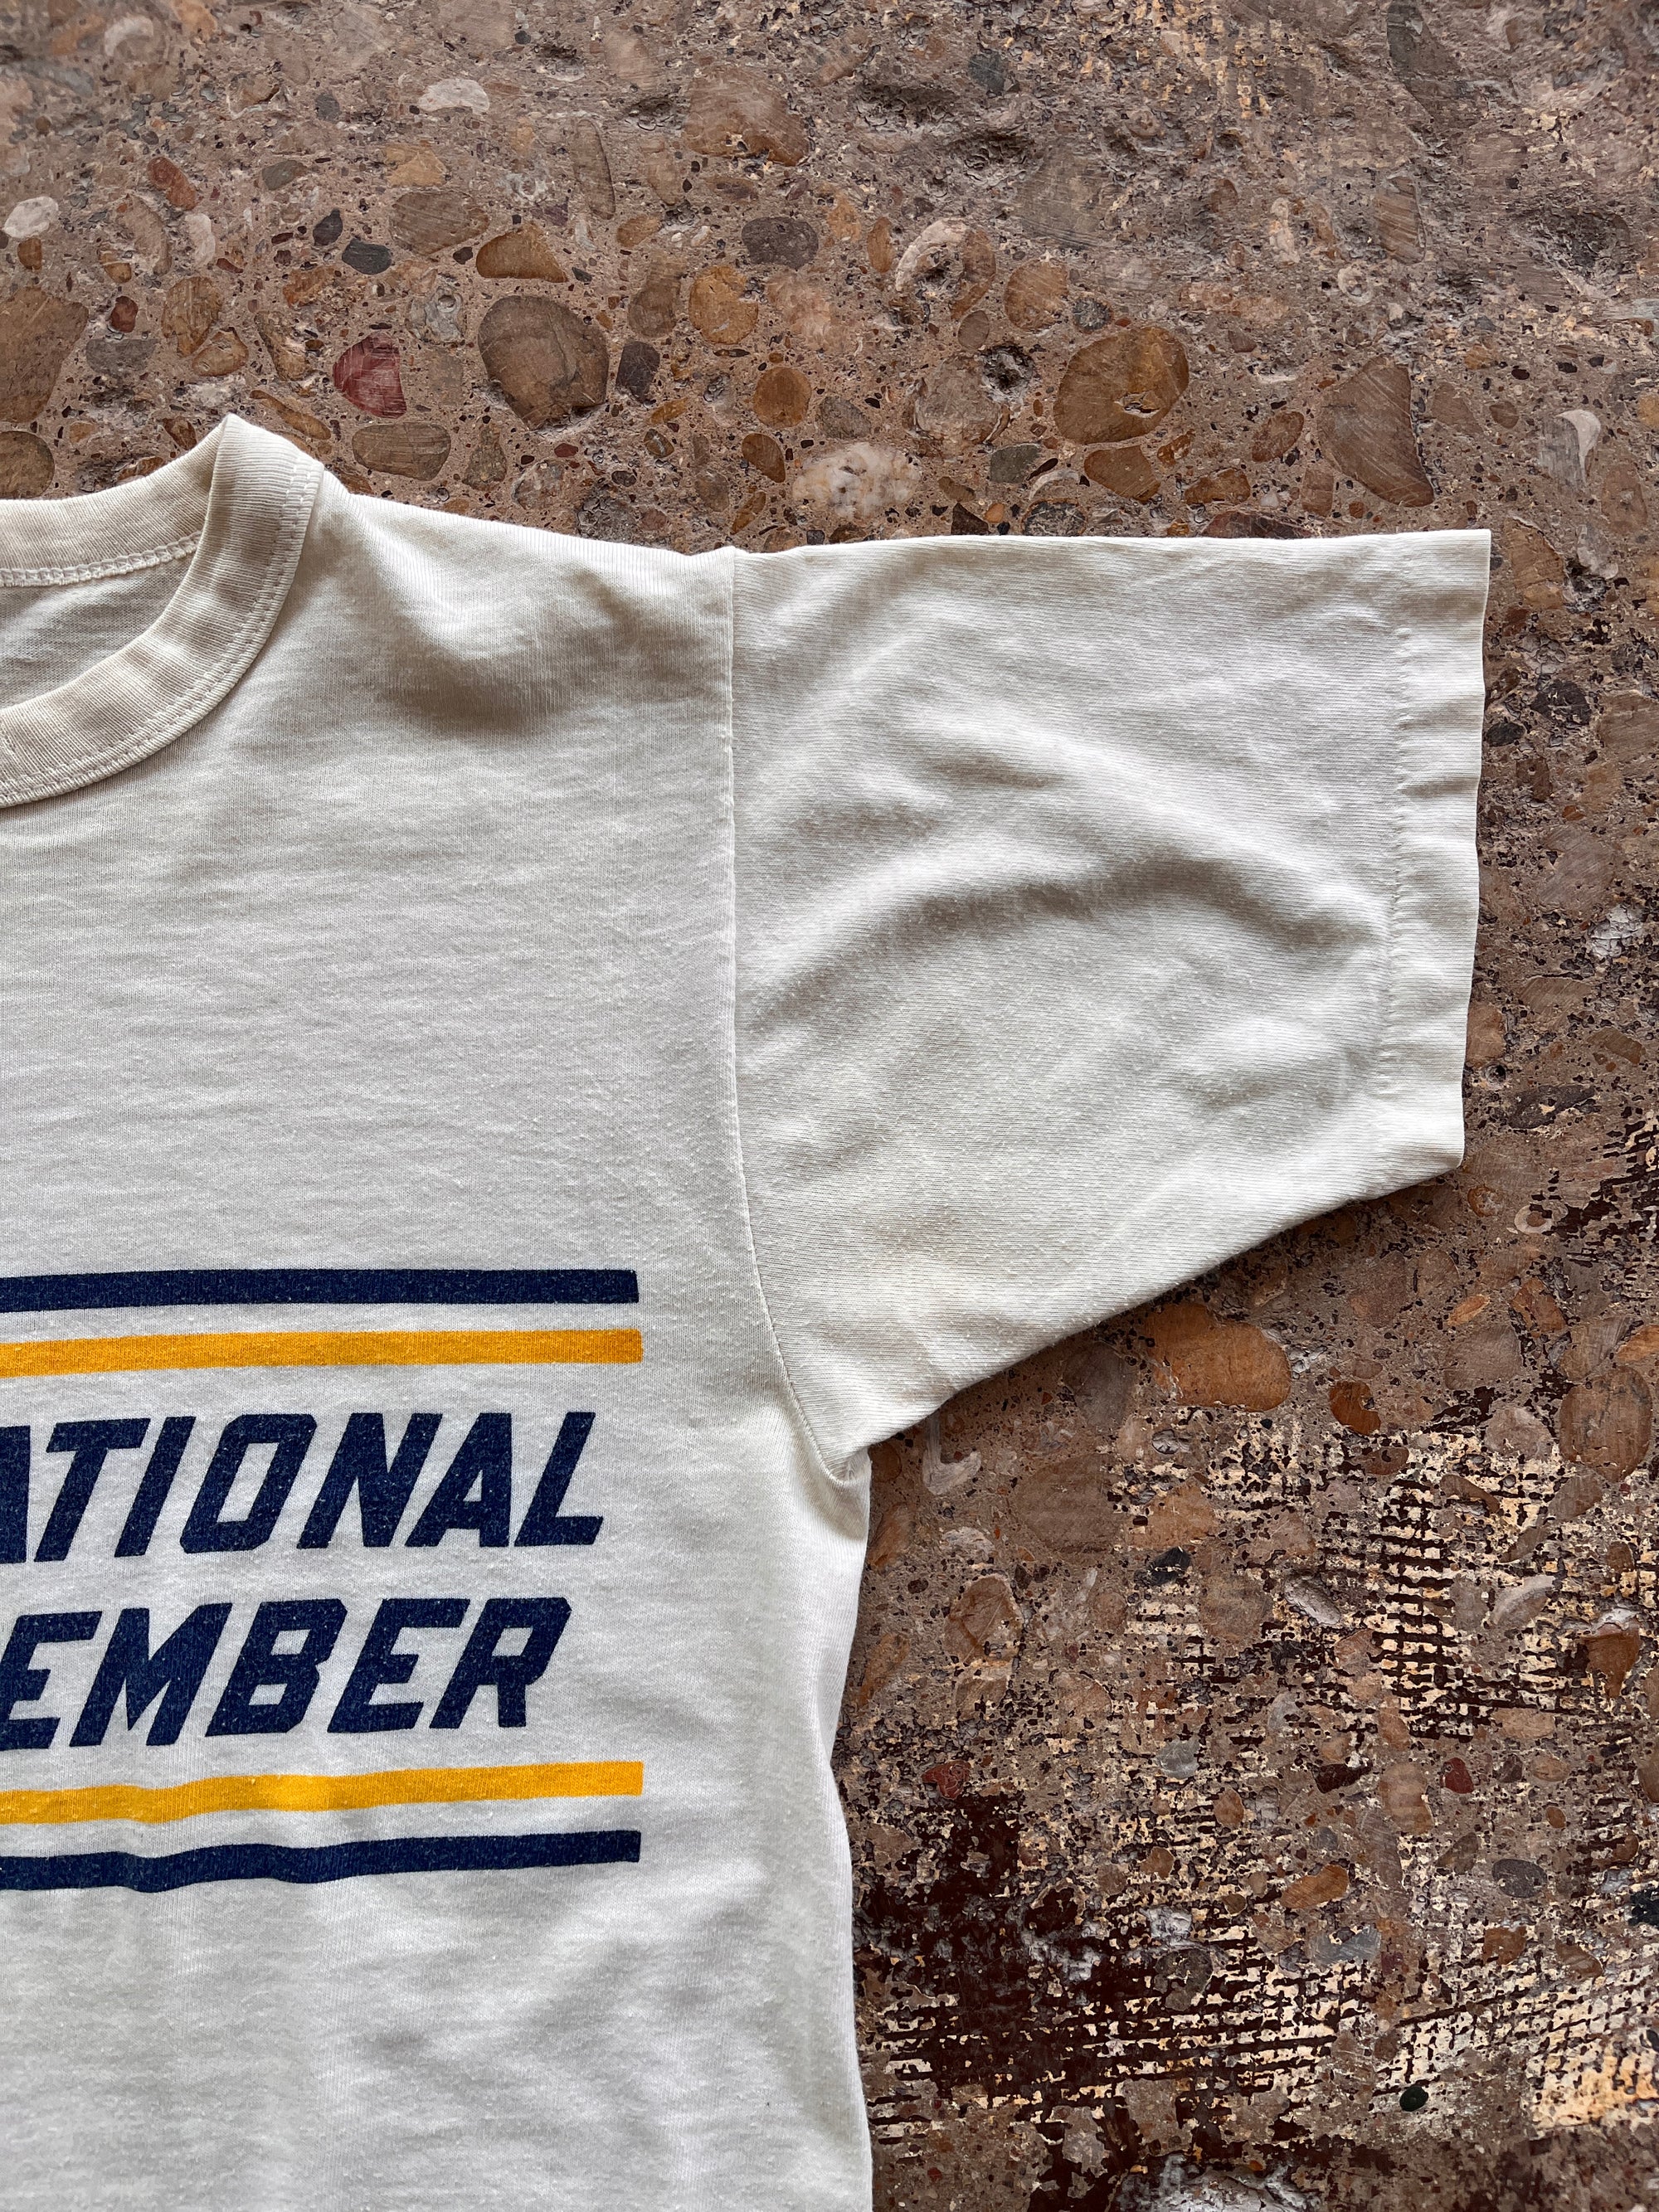 FCA National Member Graphic Tee